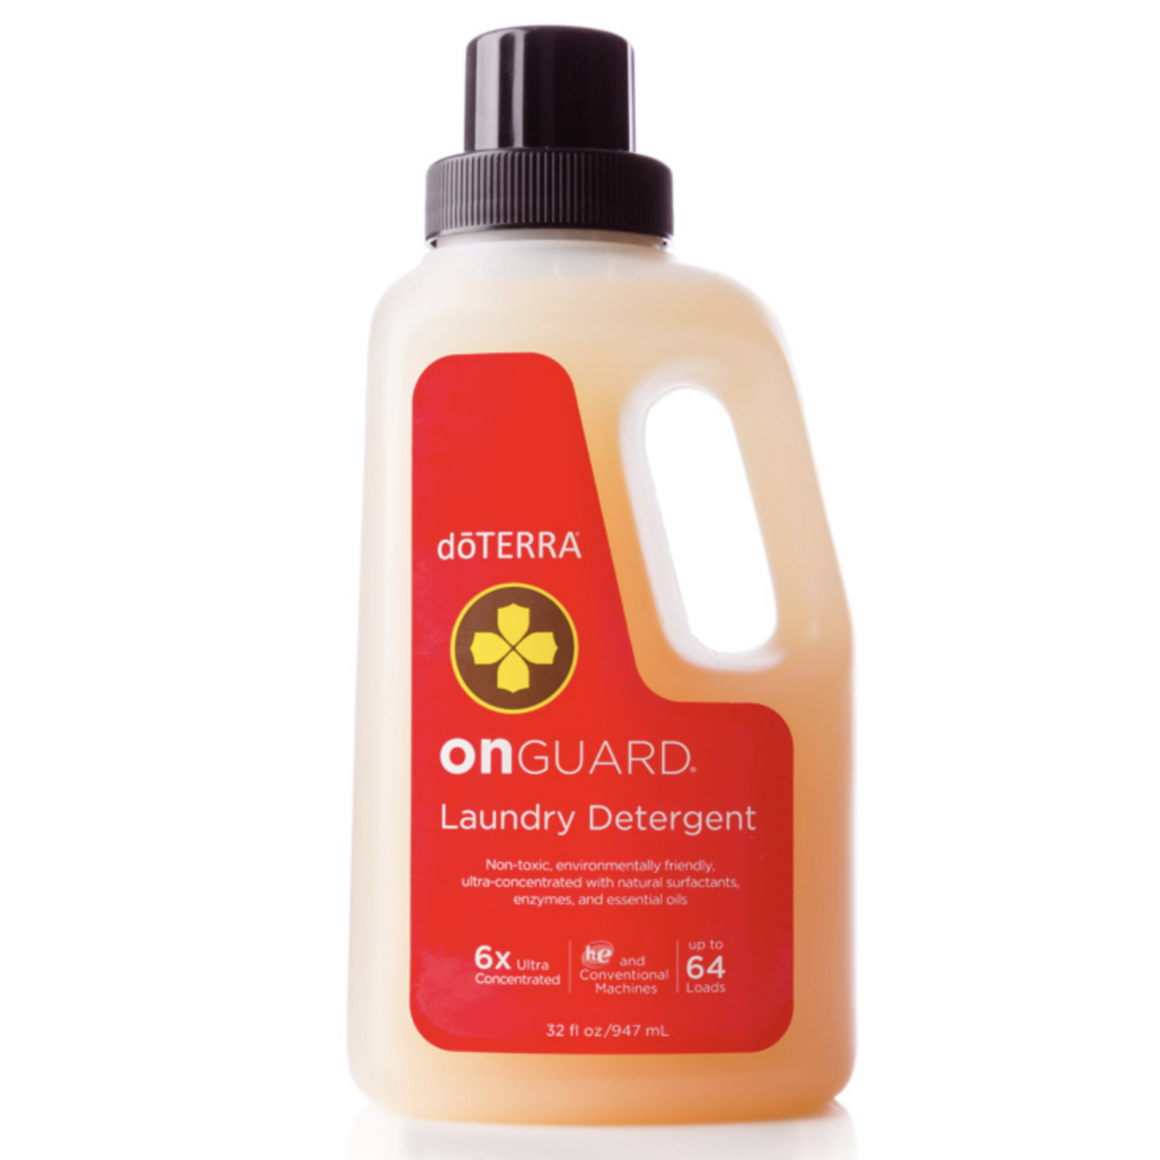 On Guard Laundry Detergent